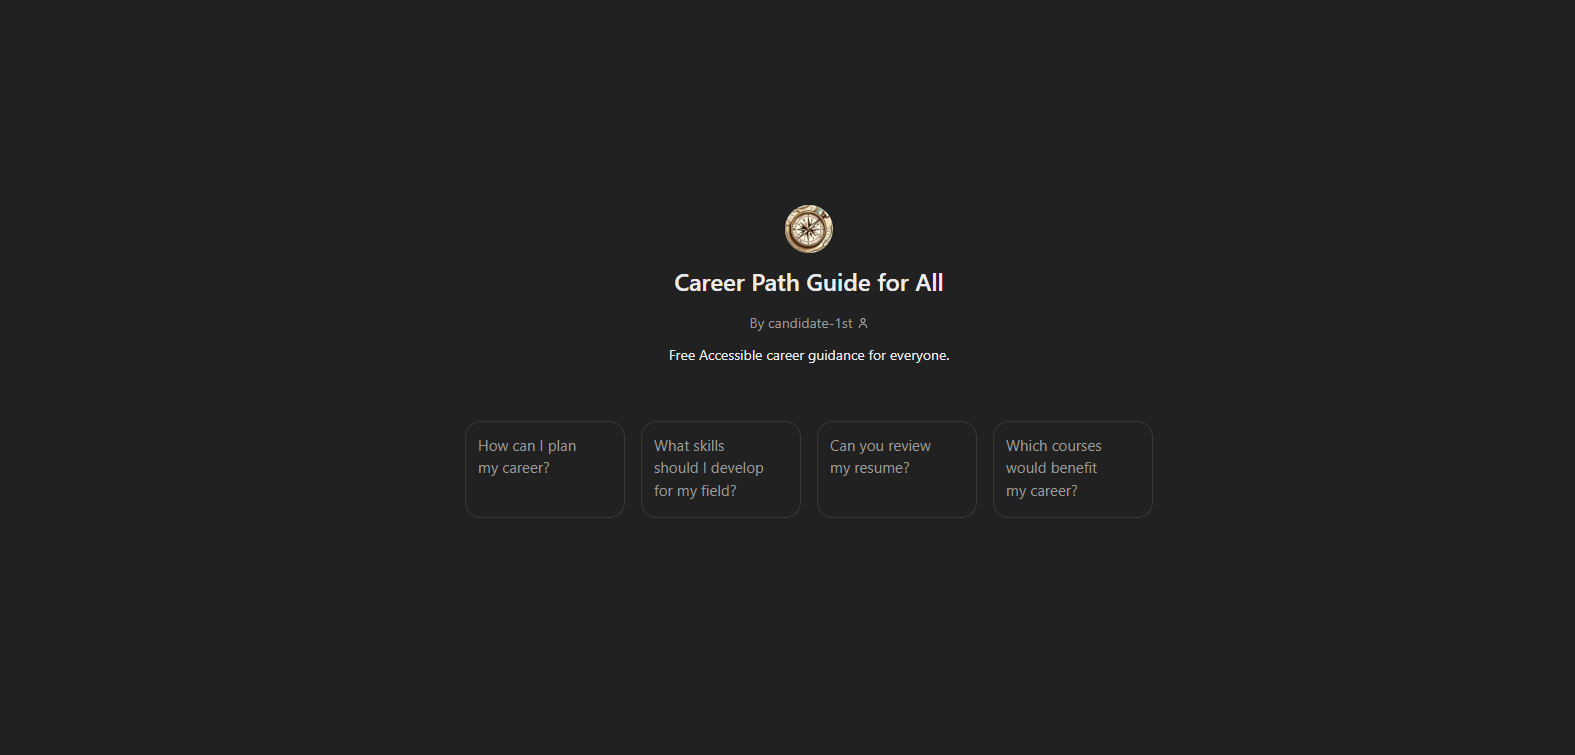 Career Path Guide for All website